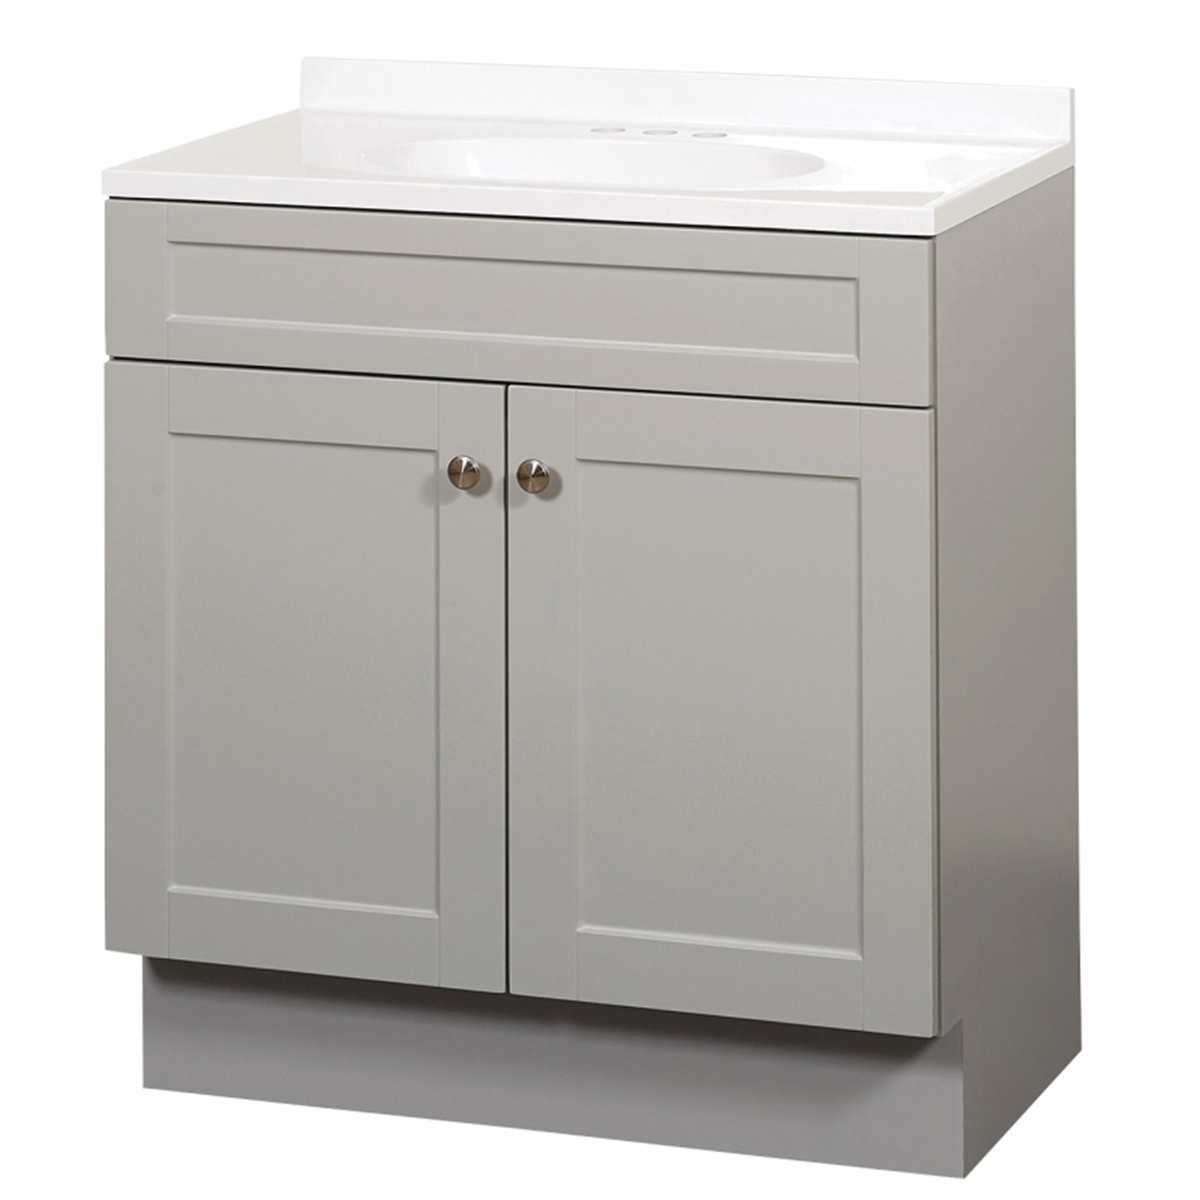 SBC36GY 2-Door Shaker Vanity with Top, Wood, Cool Gray, Cultured Marble Sink, White Sink